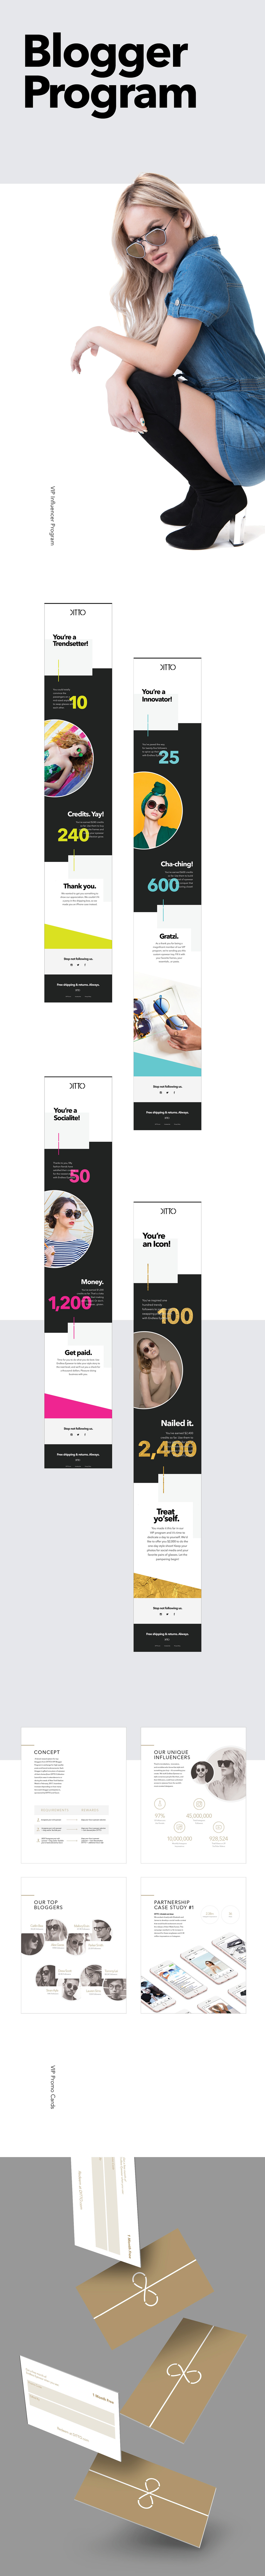 eyewear Sunglasses Fashion  ditto editorial Studio Photography fashion photography email campaigns Layout typography  